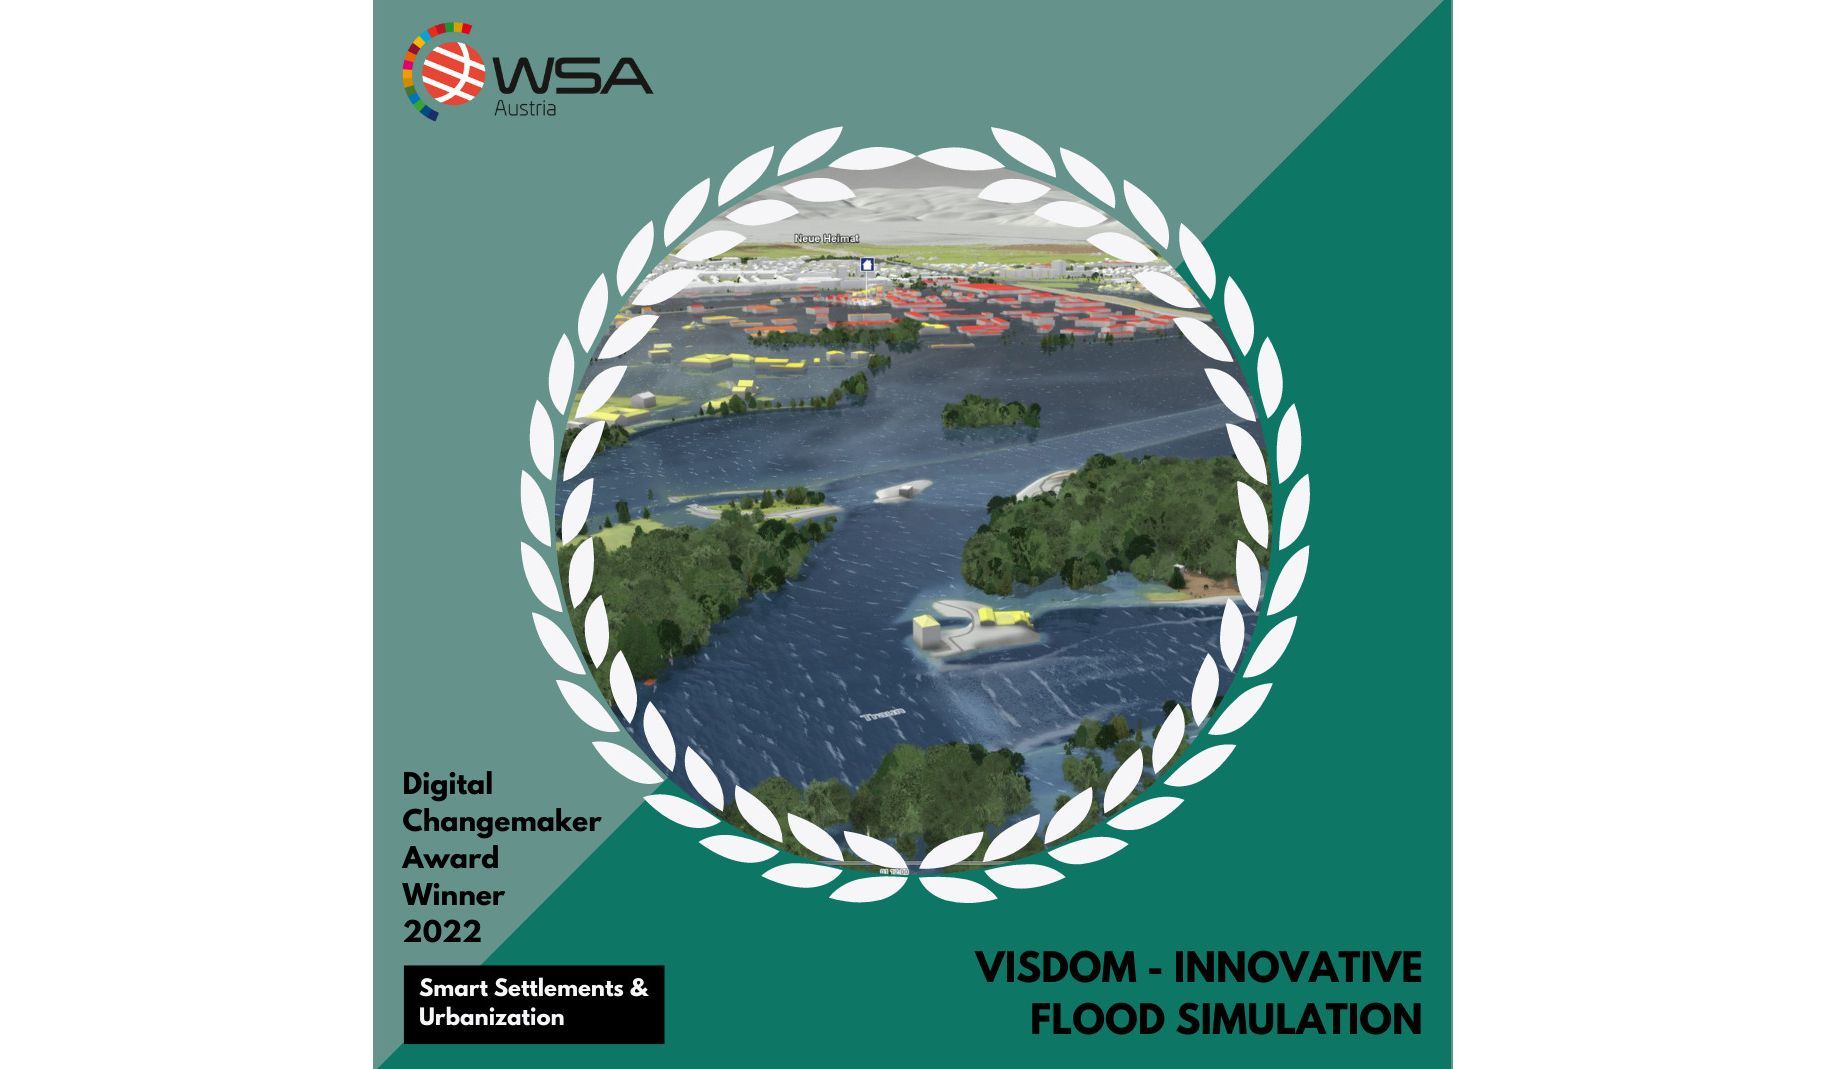 Logo of the WSA Austria Award with a picture of the viscloud software in the middle